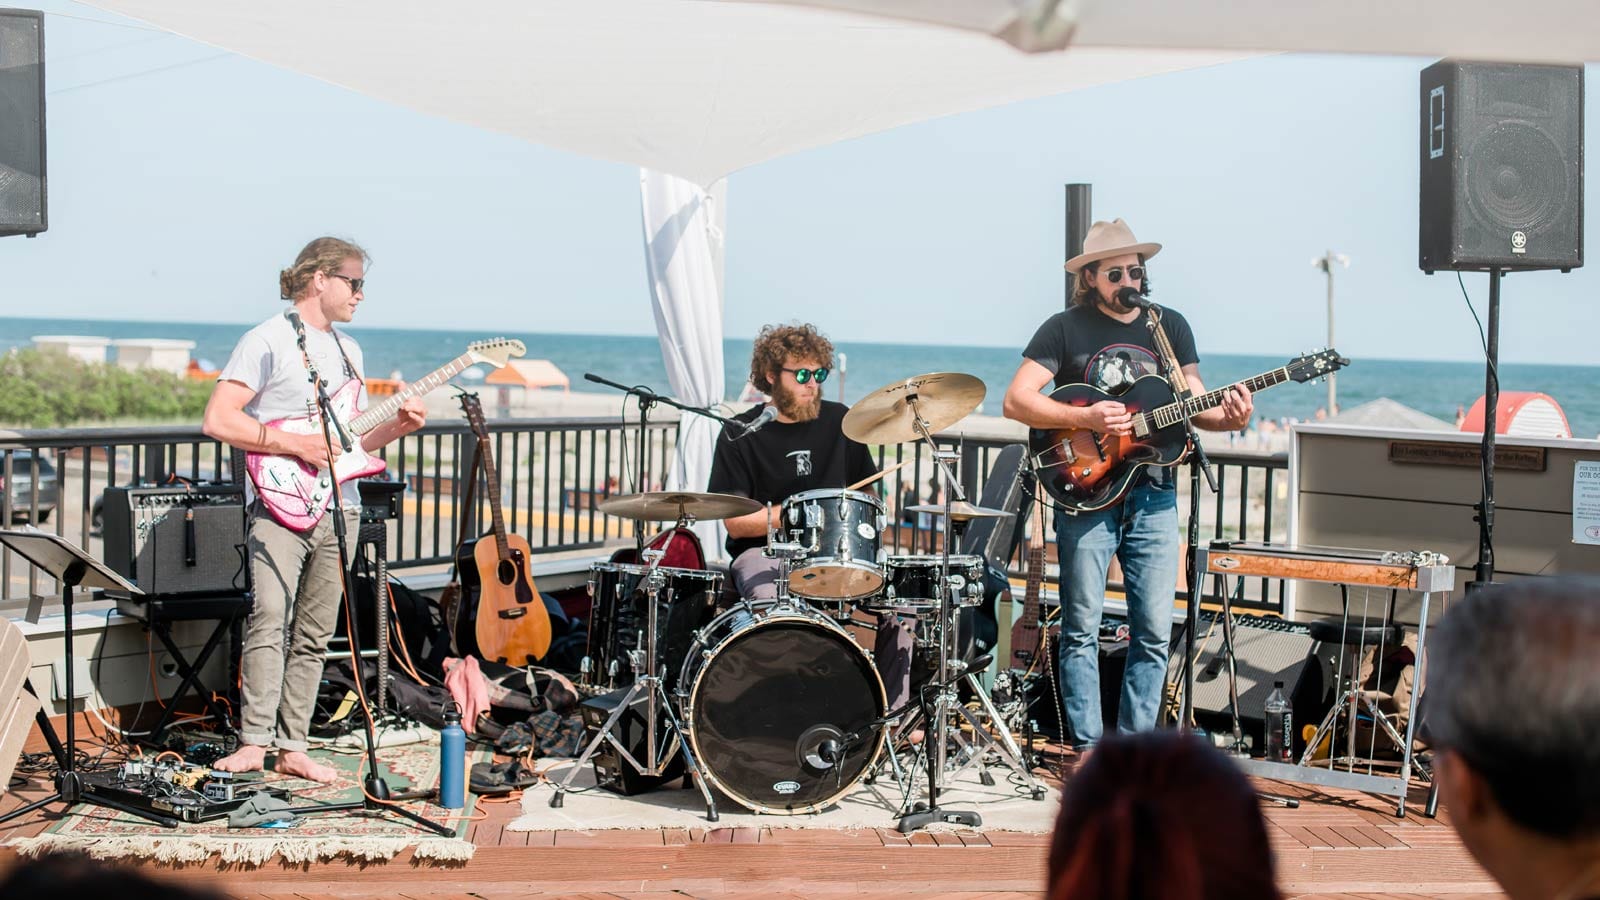 cape may nj events cape may jazz festival things to do in cape may this weekend | Cape May NJ